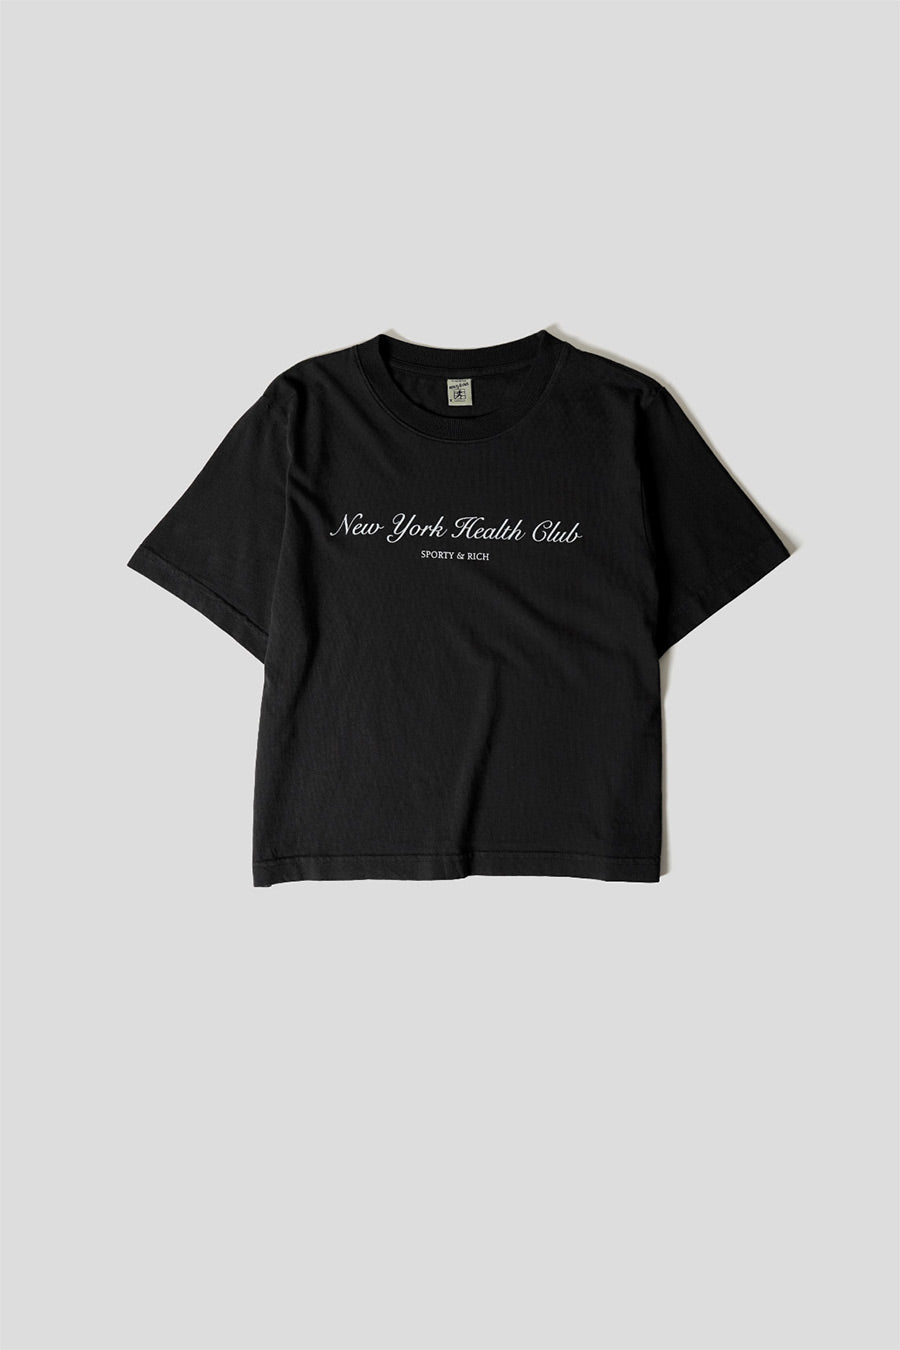 Sporty & Rich - T-SHIRT NY HEALTH CLUB CROPPED NOIR - LE LABO STORE